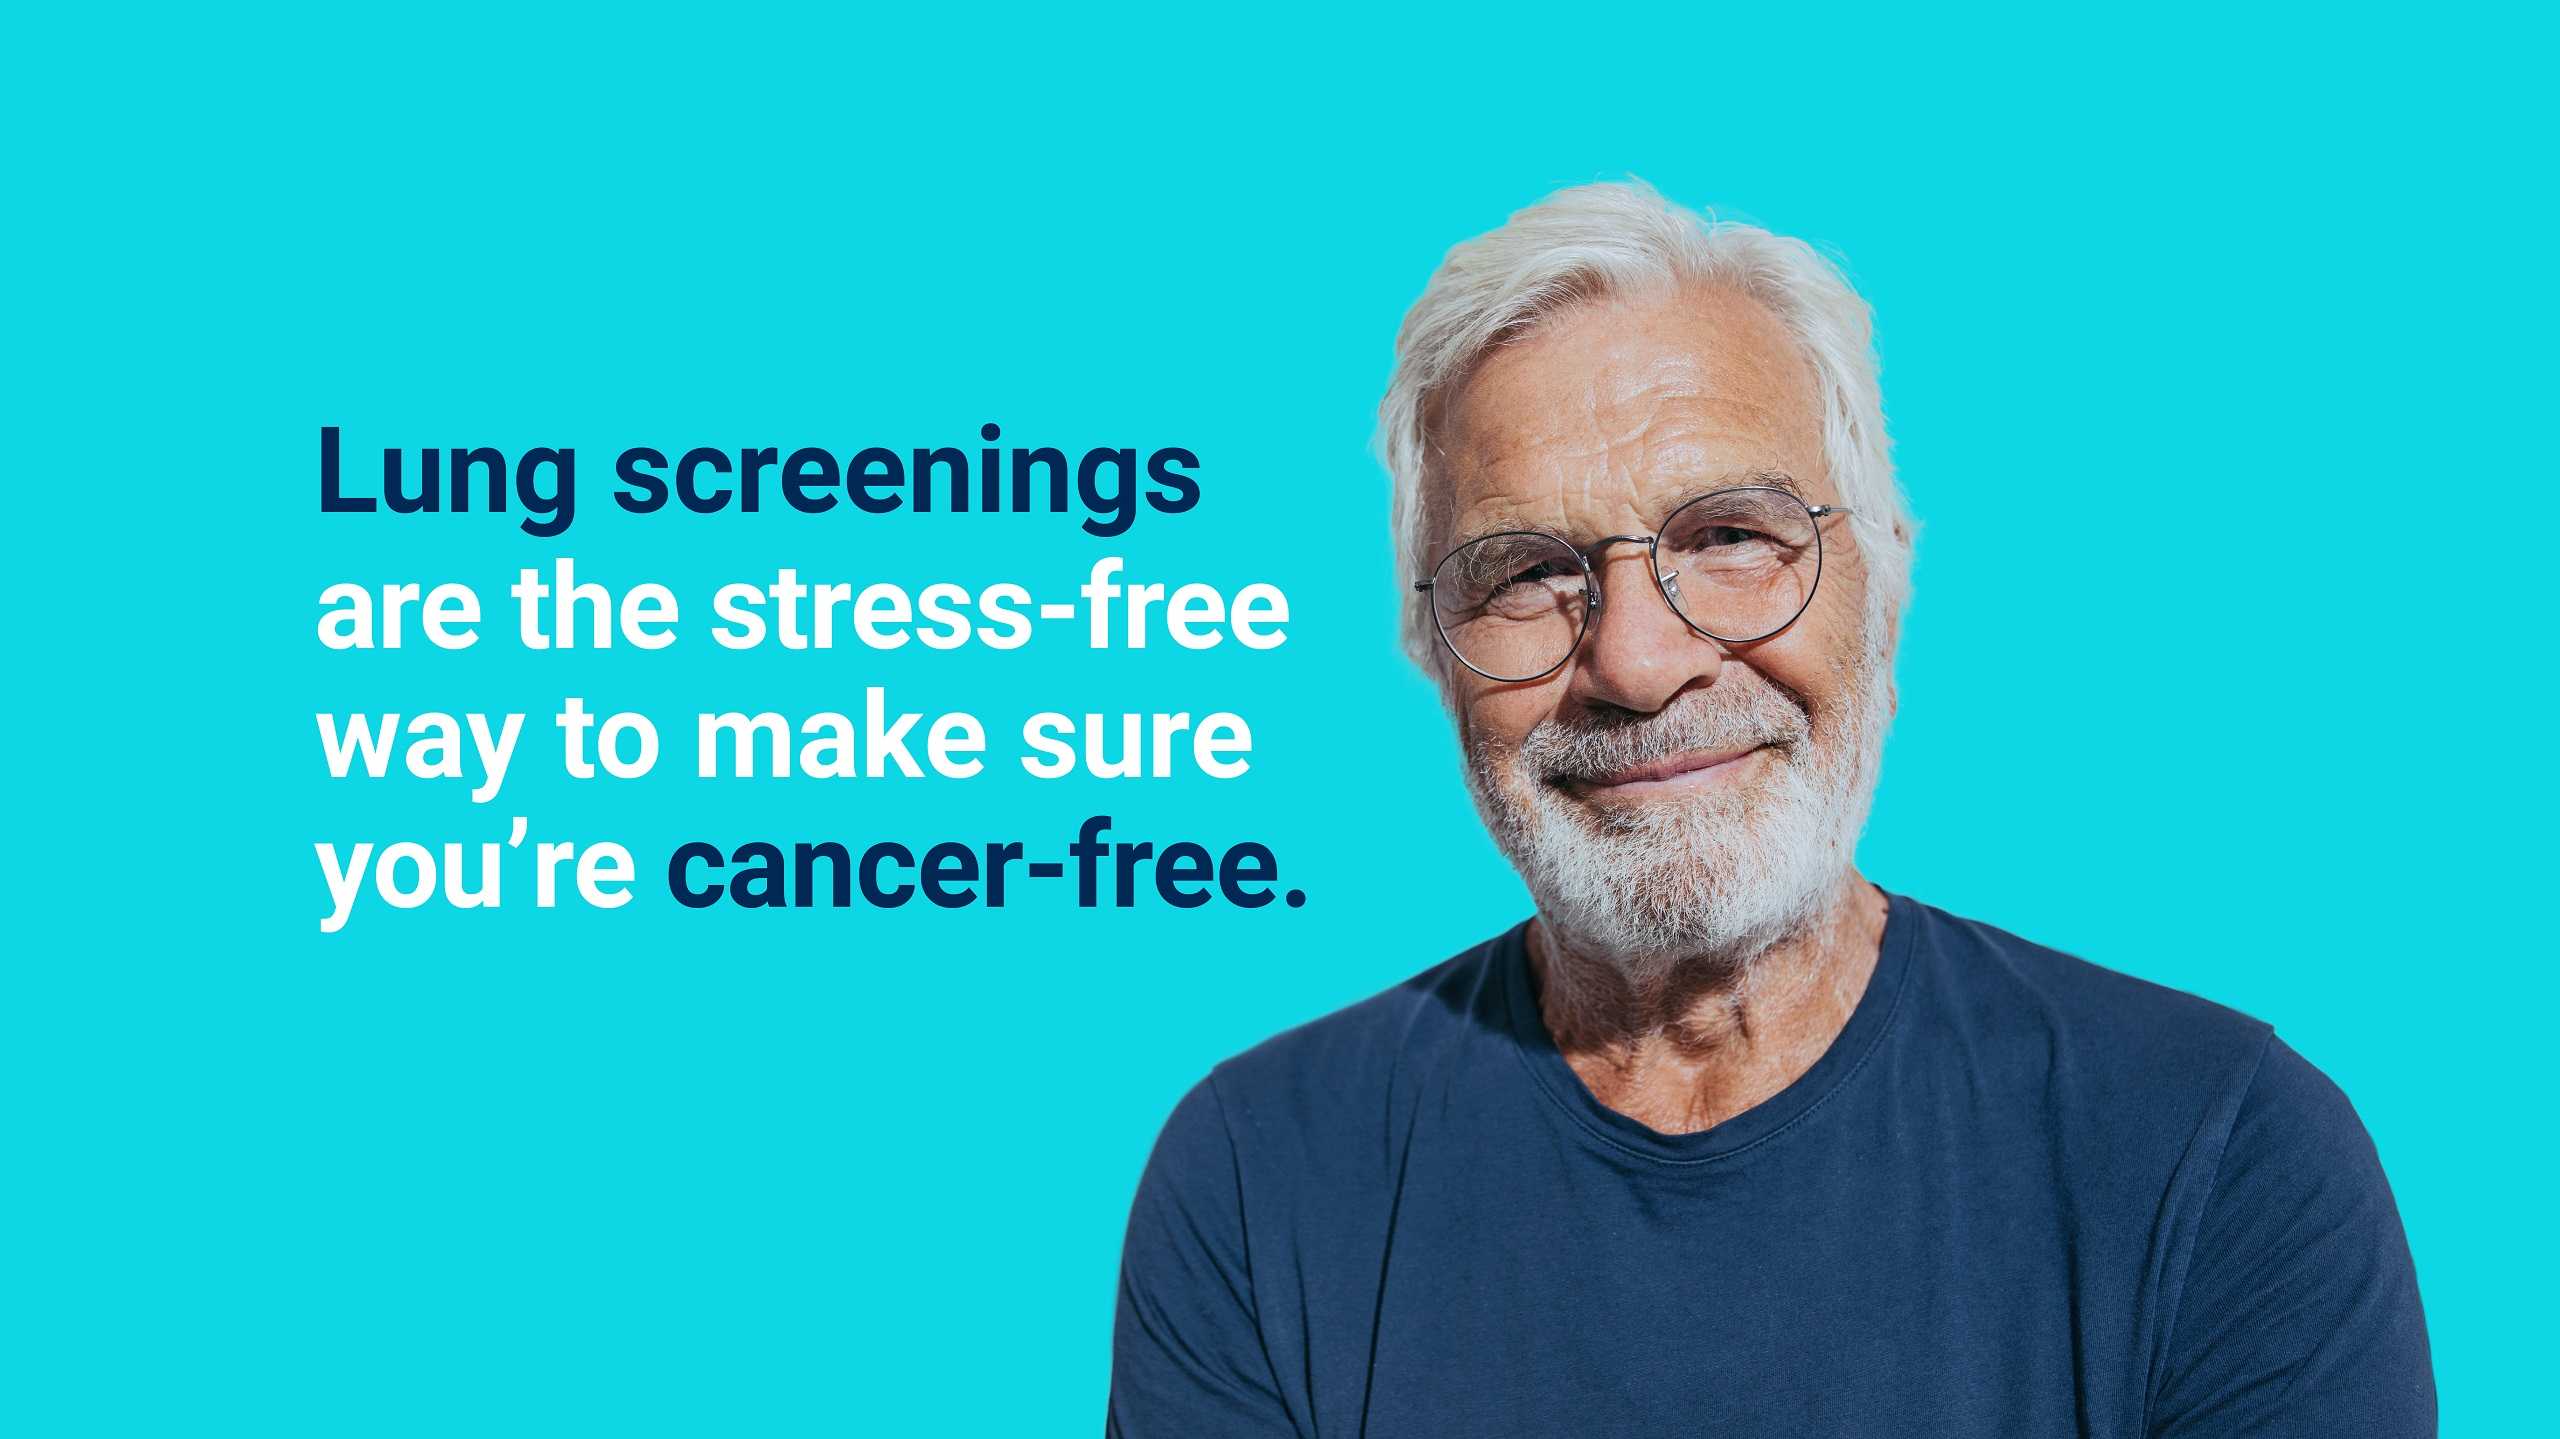 Lung screenings are the stress-free way to make sure you're cancer-free